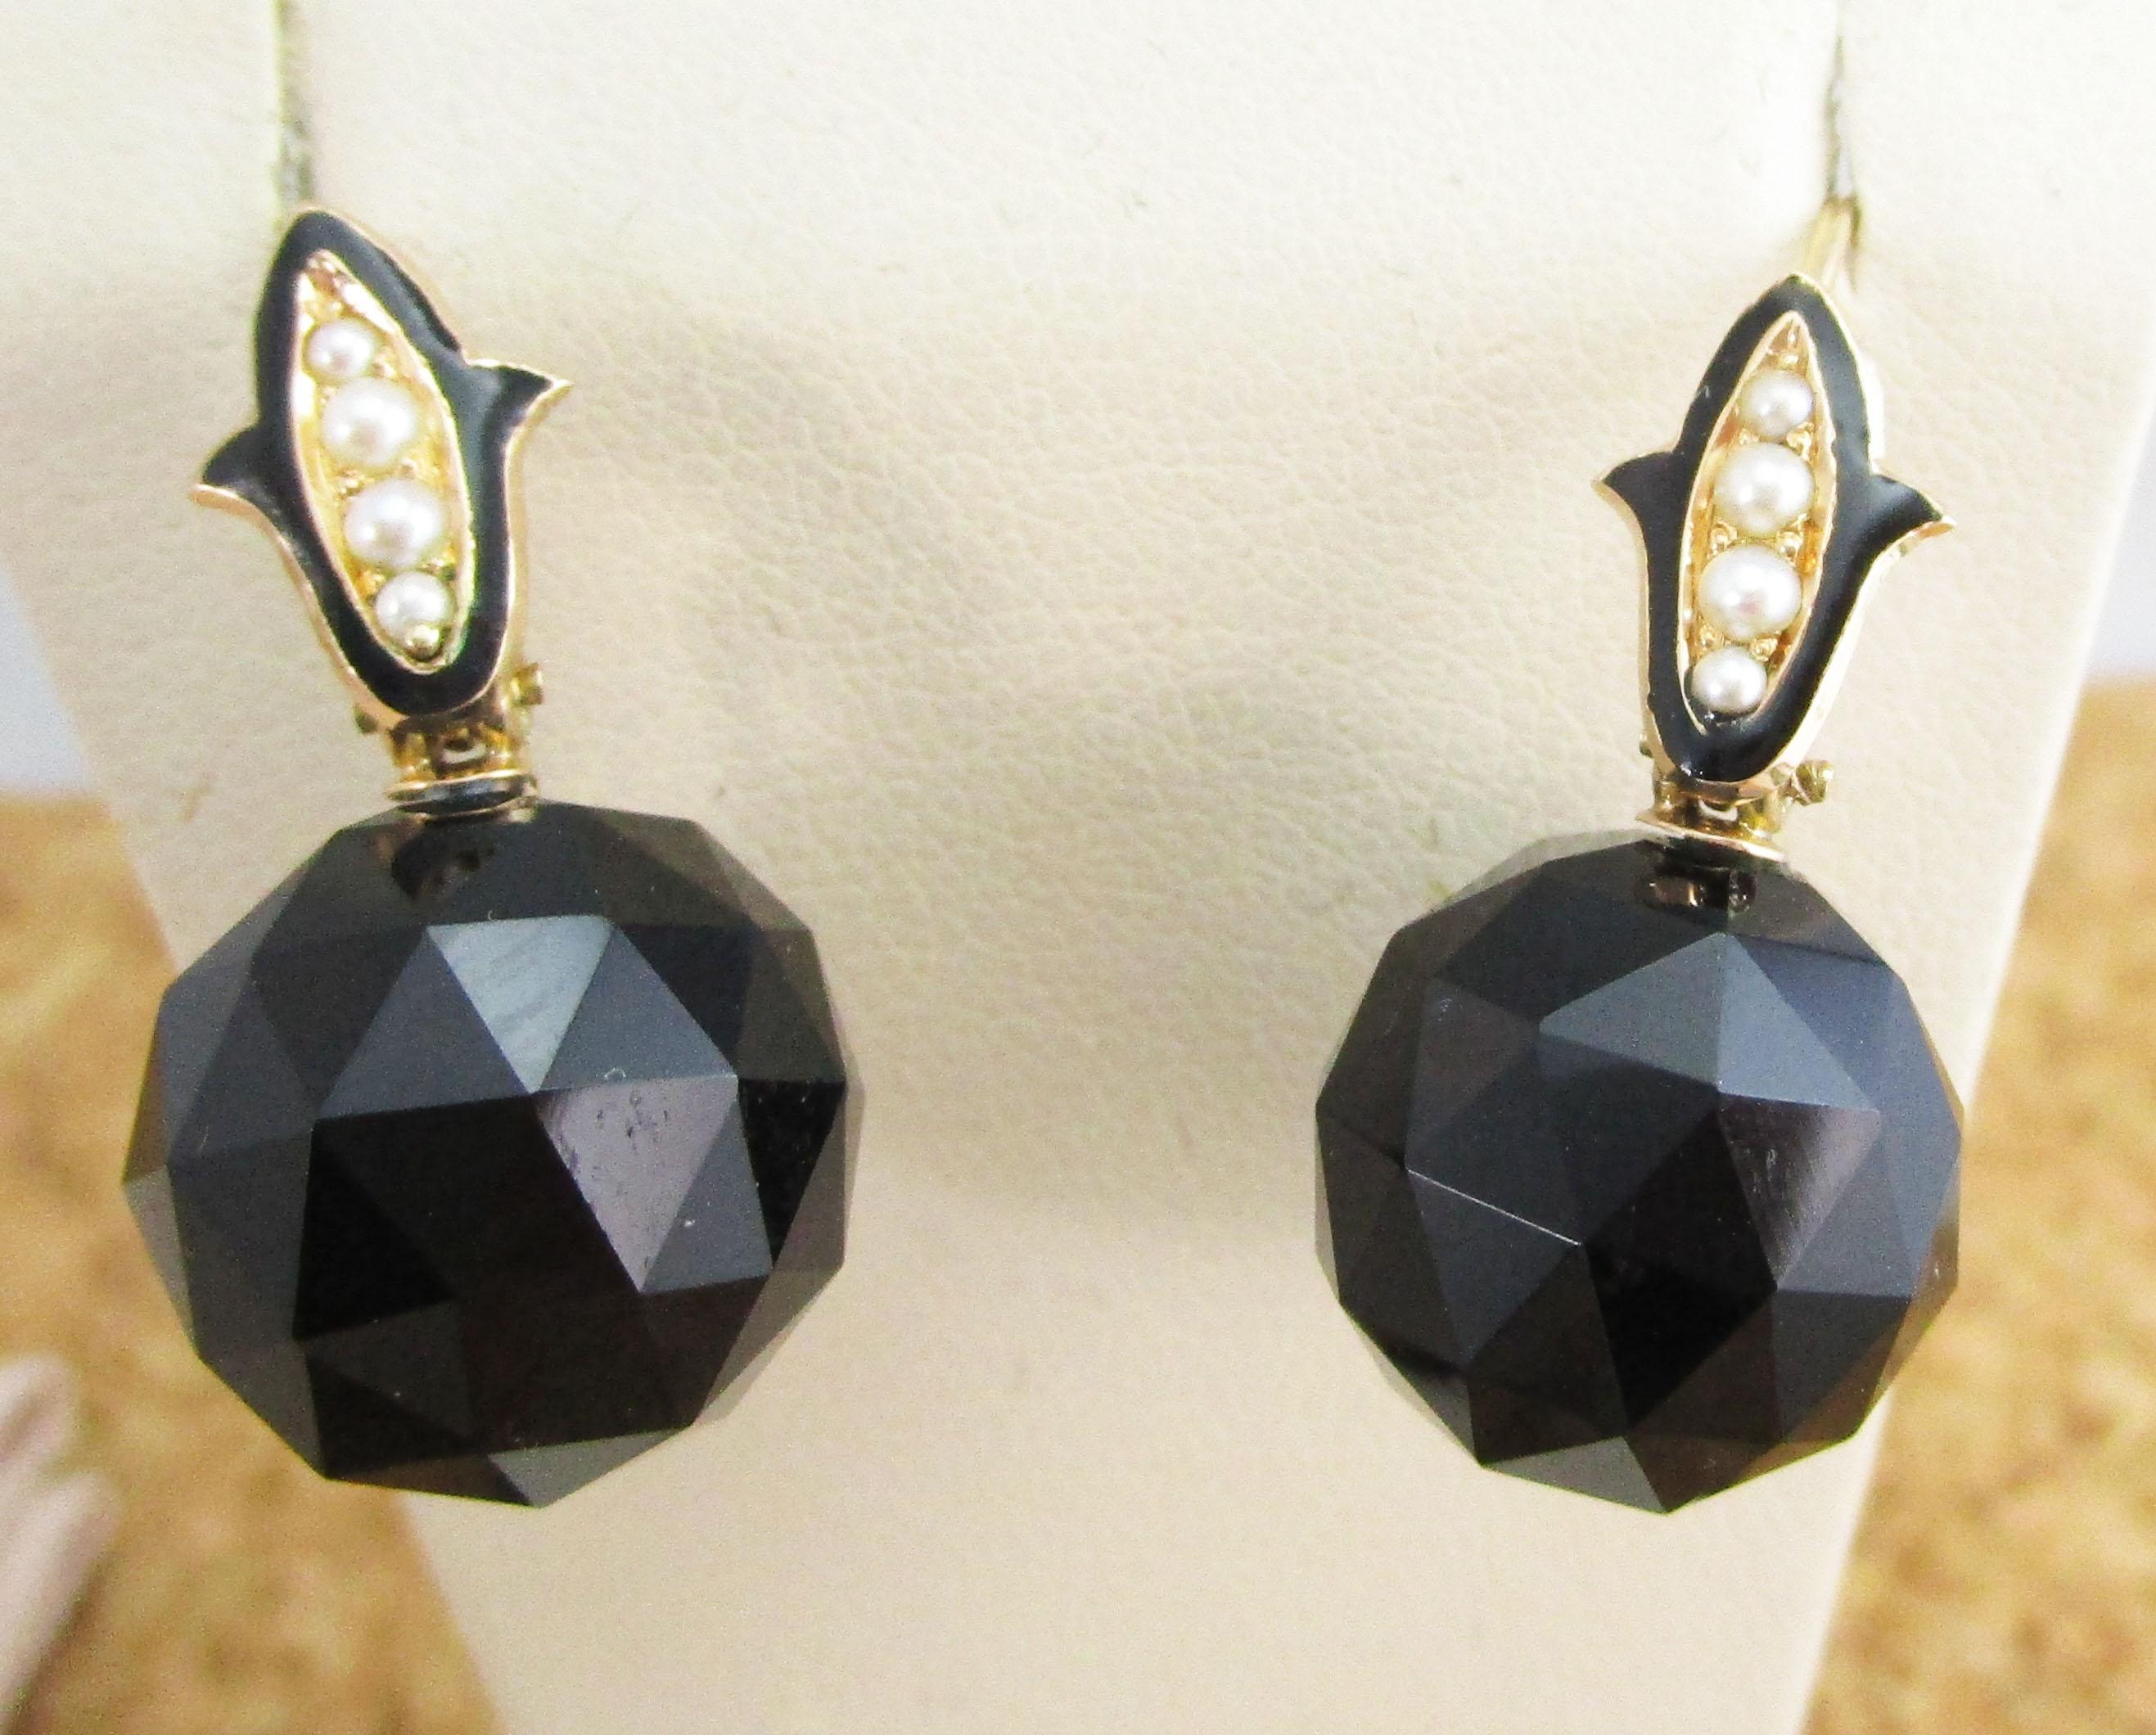 This is a gorgeous pair of Victorian earrings in14k rose gold with dramatic faceted black onyx dangles and deep black onyxaccented by graduated seed pearls. These earrings are unlike any modern jewelry! They are overflowing with the unique appeal of